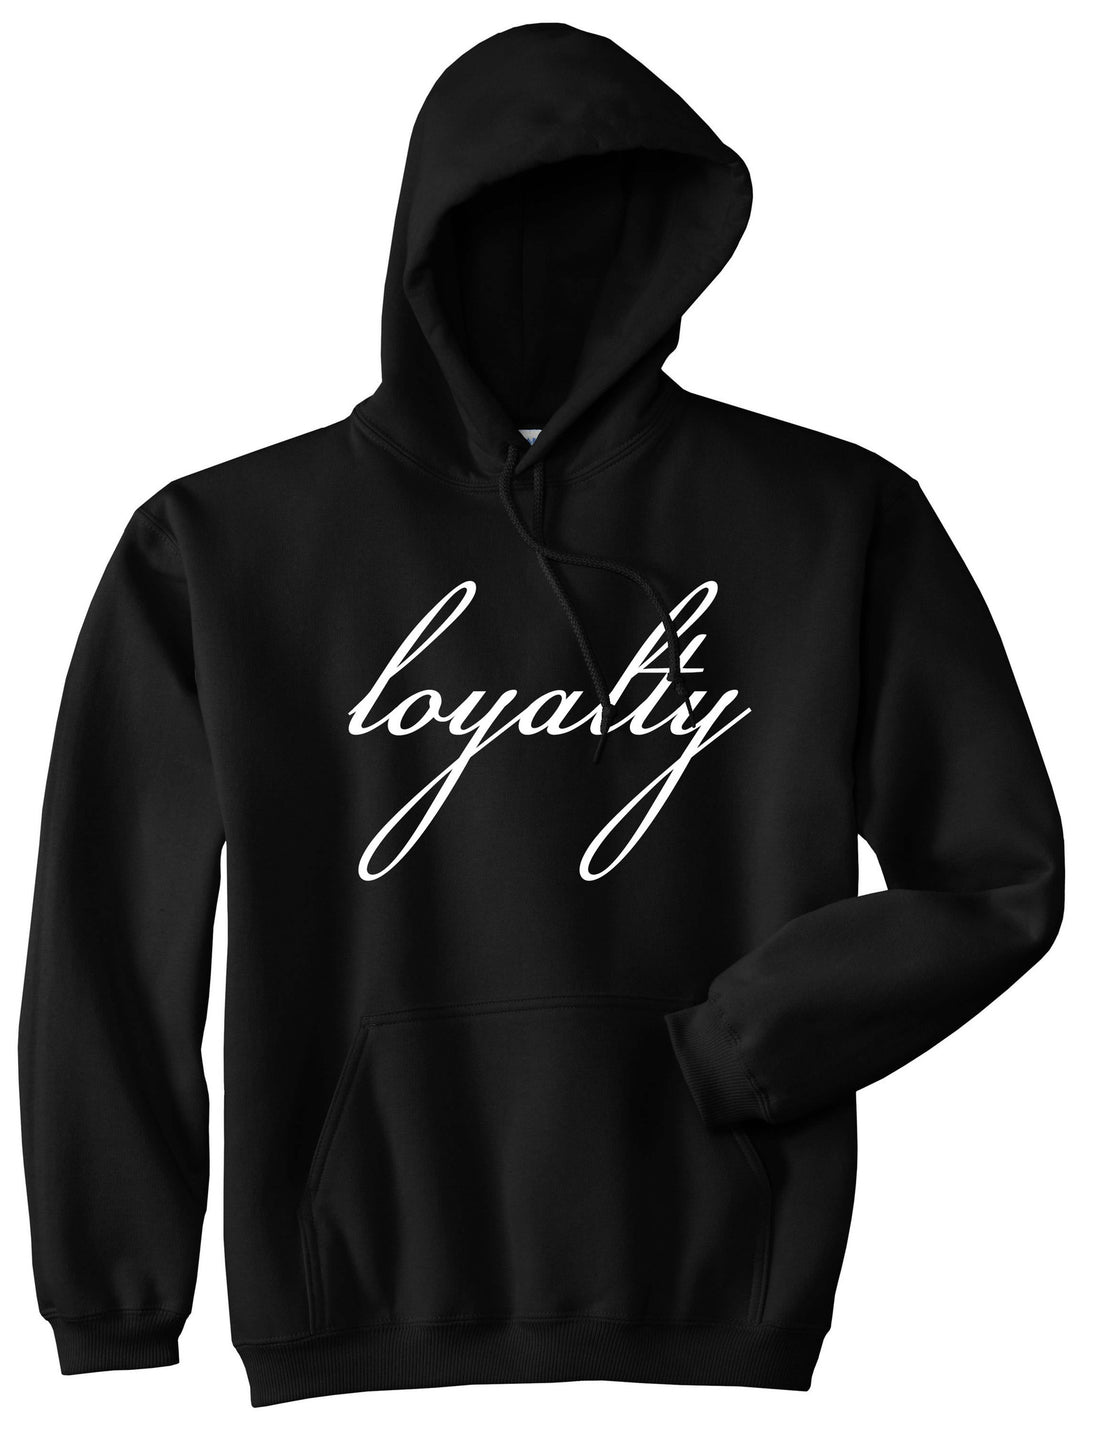 Loyalty Respect Aint New York Hoes Boys Kids Pullover Hoodie Hoody In Black by Kings Of NY